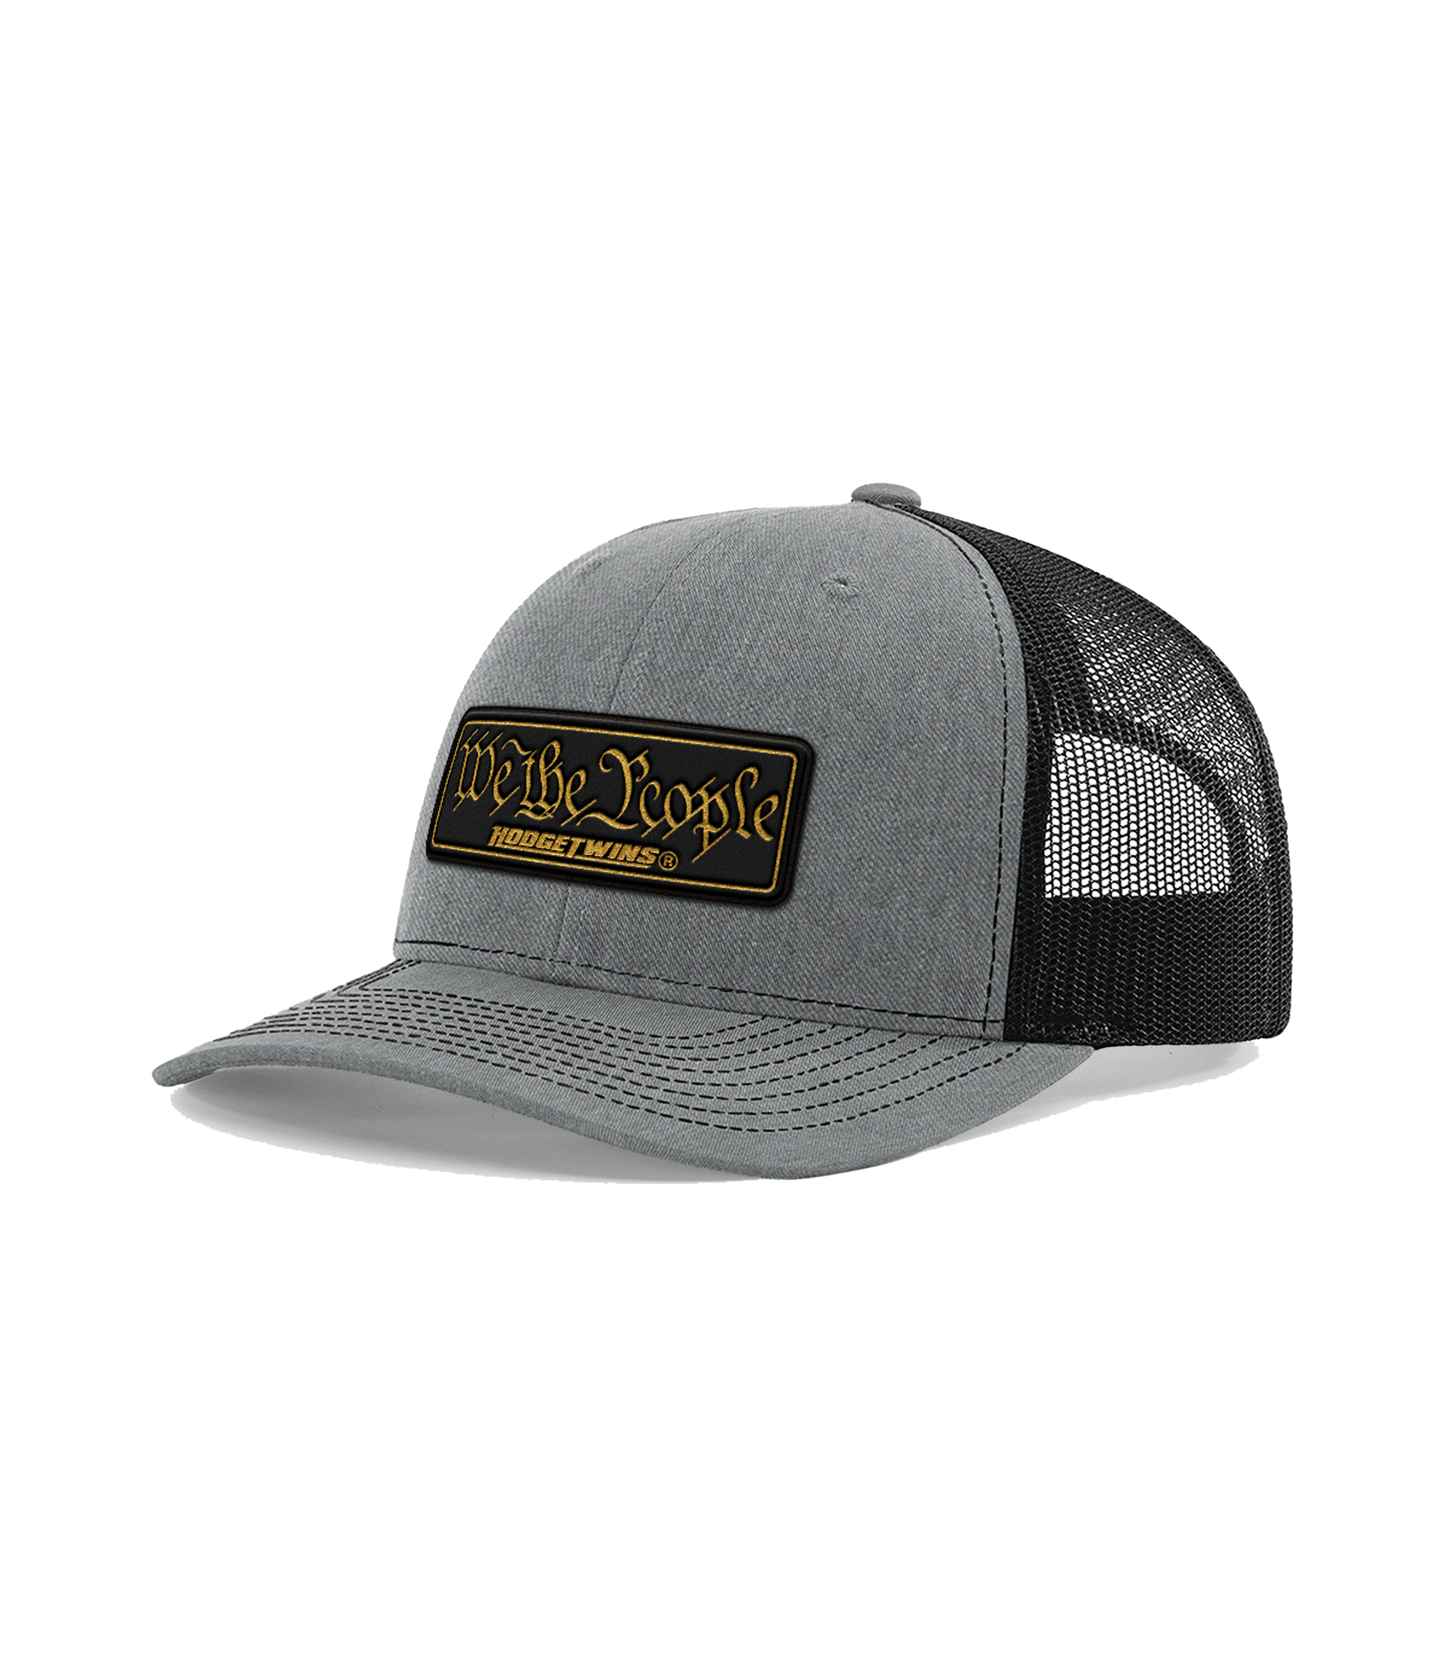 Grey front black mesh OSFA mesh hat with a black and gold leather patch that reads We The People